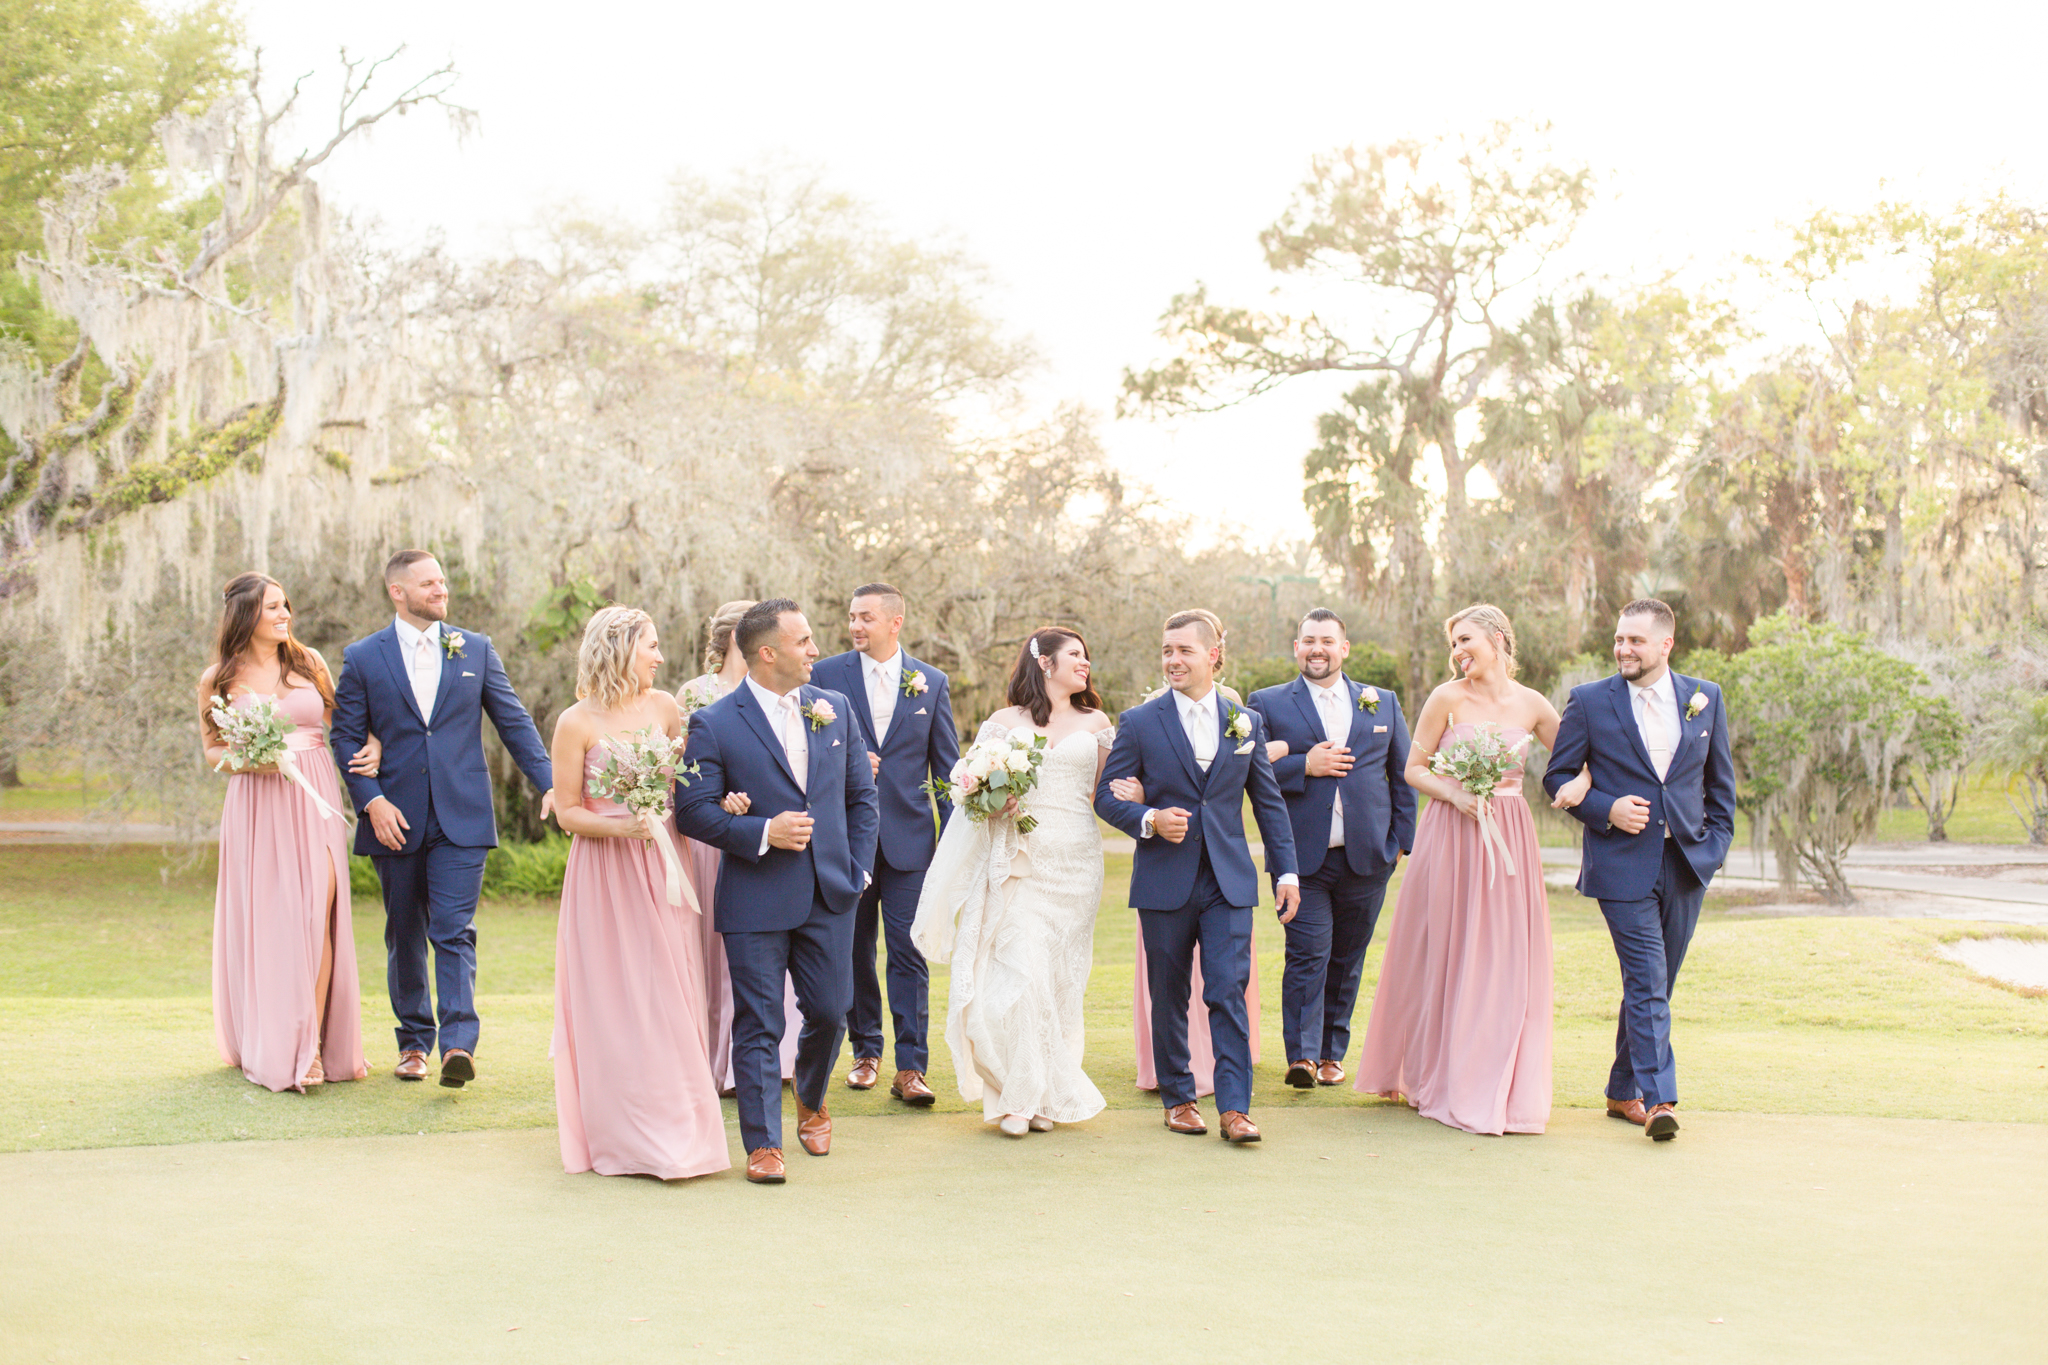 Wedding party walks and laughs during sunset.